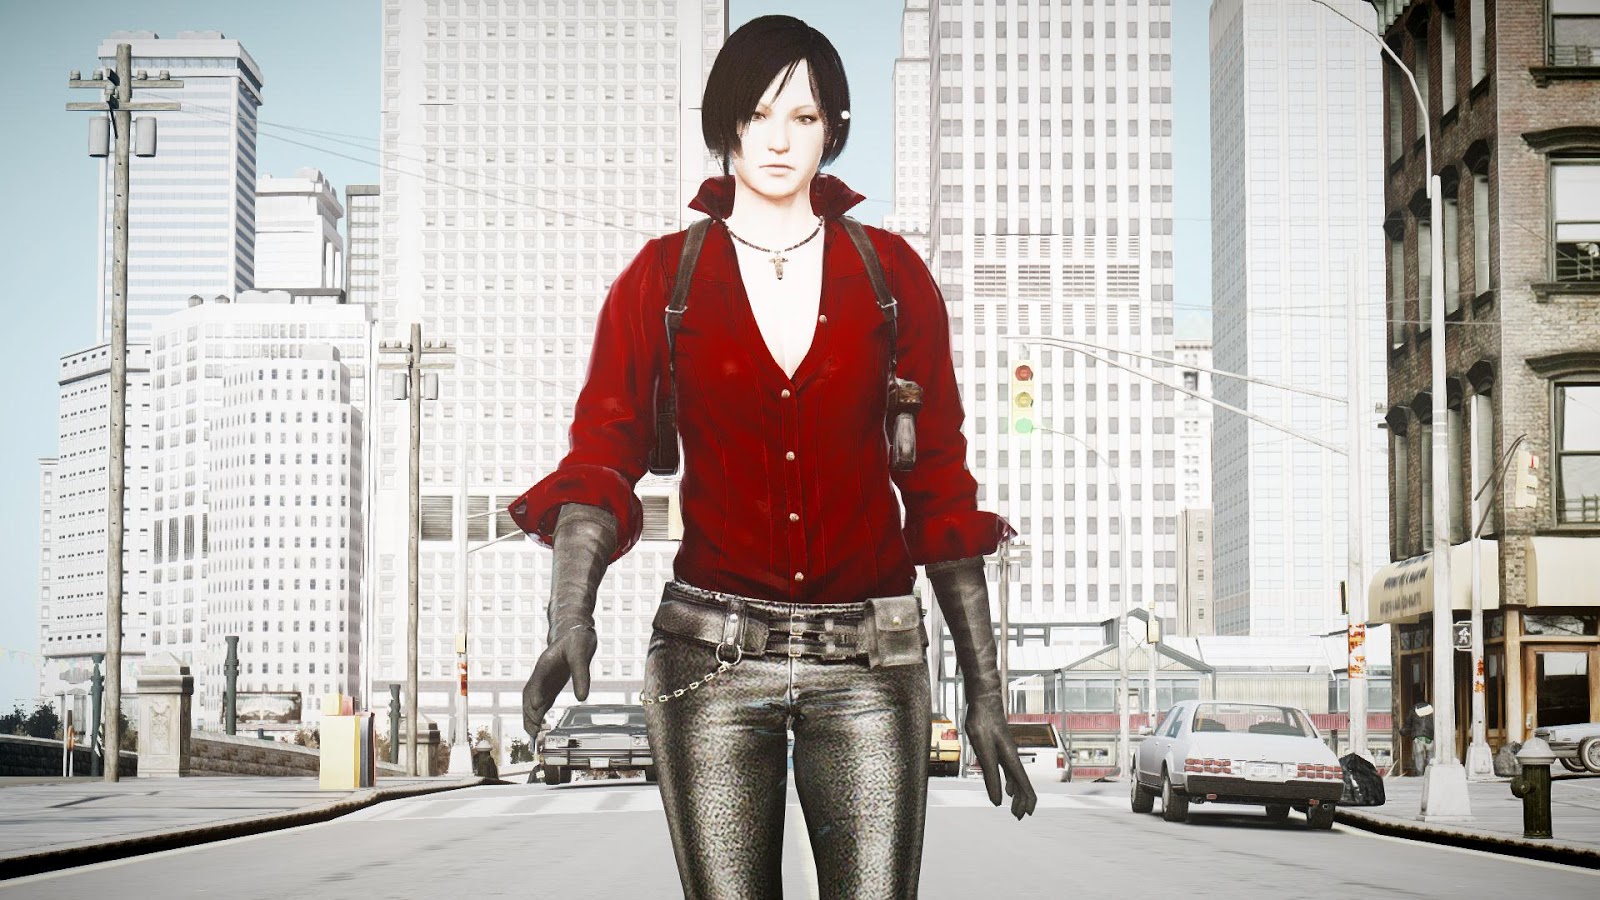 Resident Evil 6 - Helena Usa Outfit pour GTA San Andreas